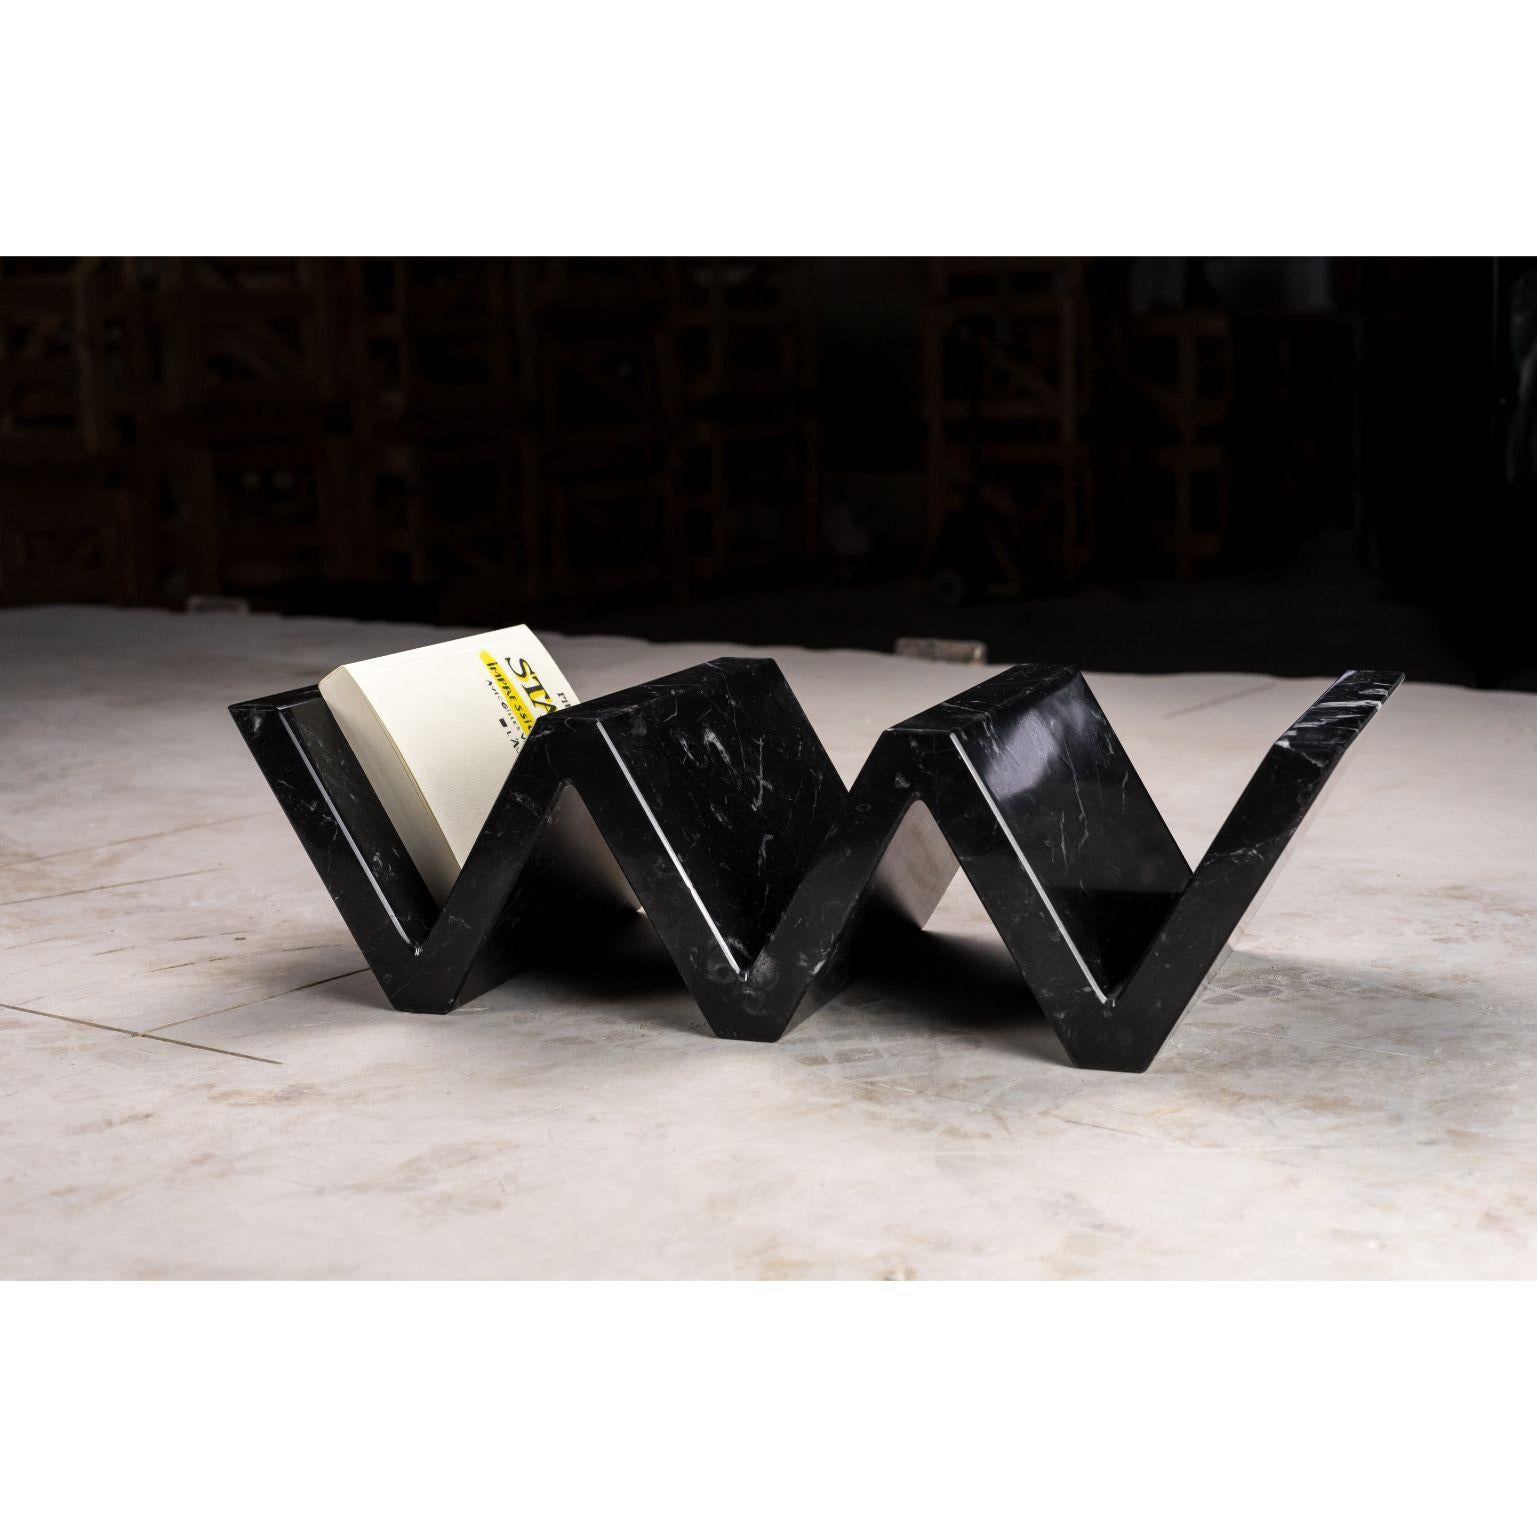 Serpentine marble bookholder - Large by Essenzia
Materials: Nero Marquina
Dimensions: 73 x 30 x 20 cm

Also available: Carrara, India green, and small size

Serpentine it’s an innovating solution with multiple purposes. It can be used as a